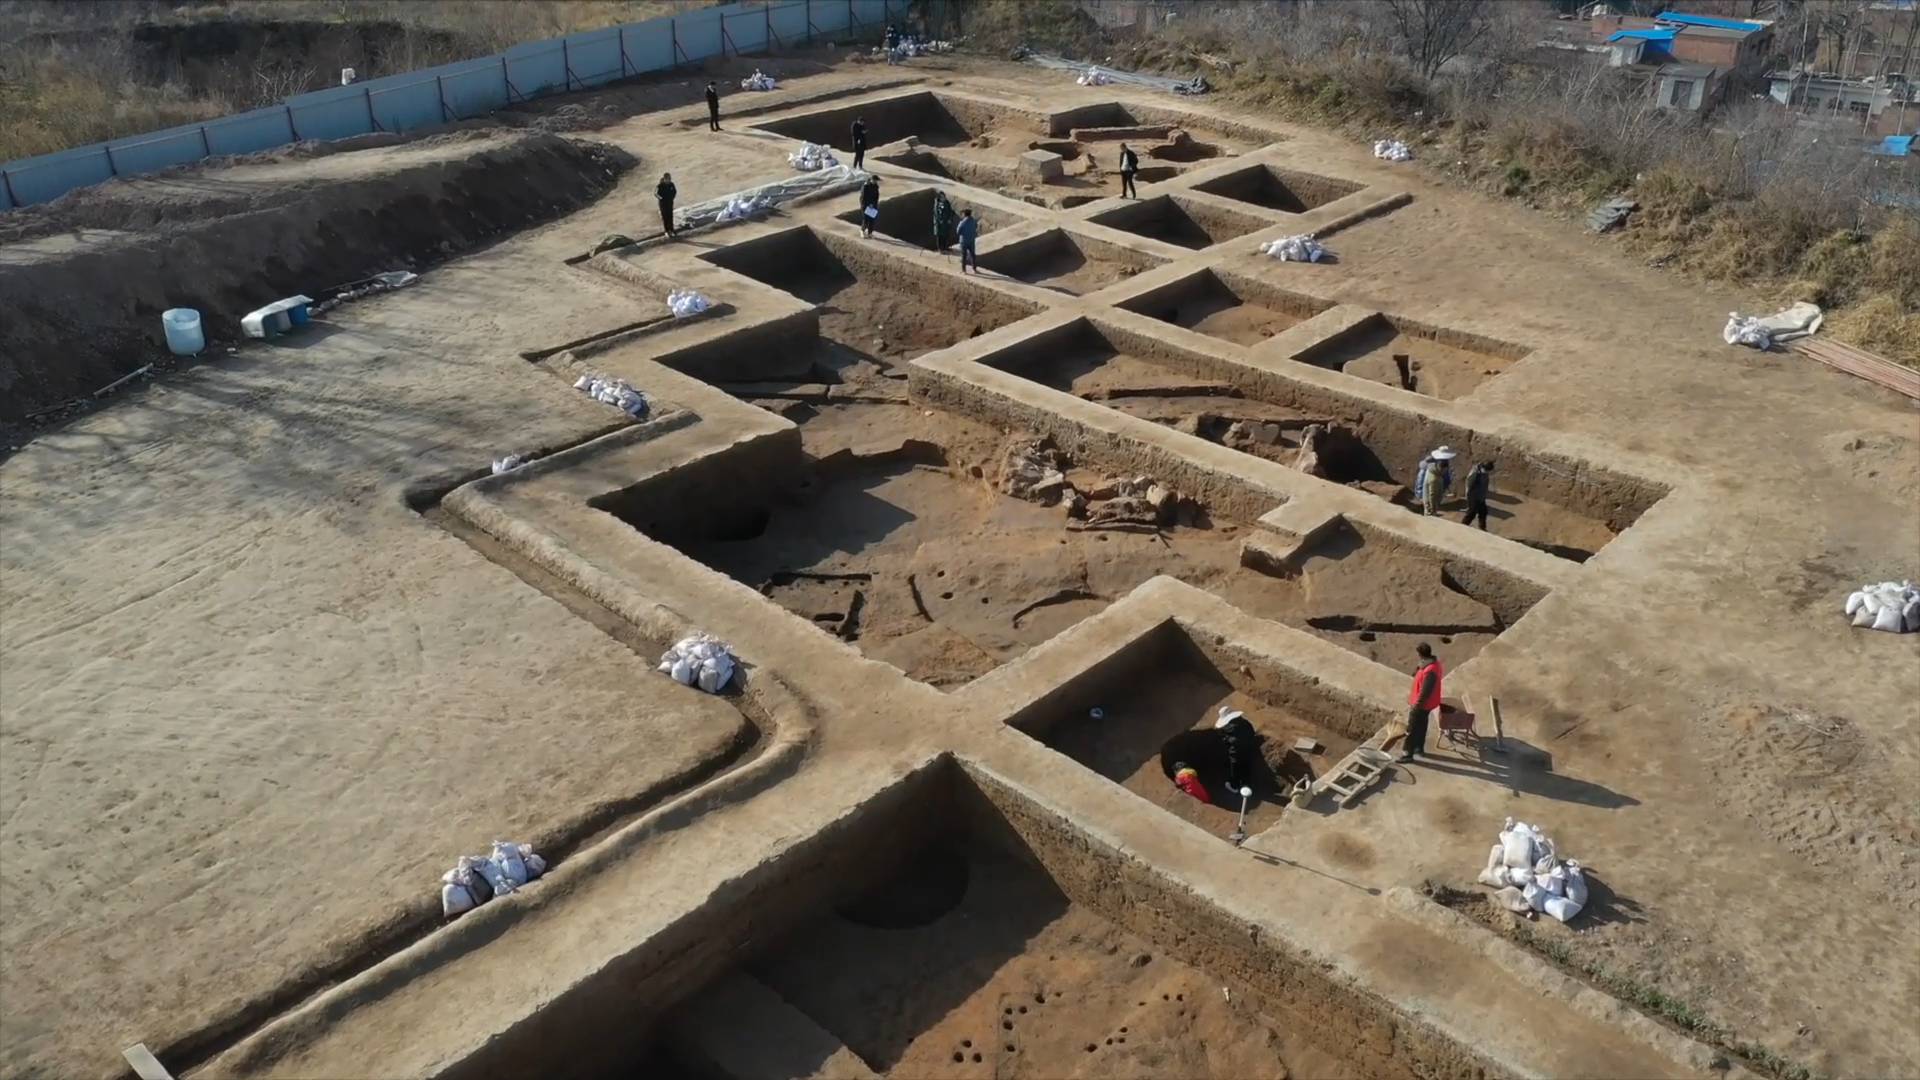 GLOBALink | Relics show cultural exchanges some 5,000 years ago in central China